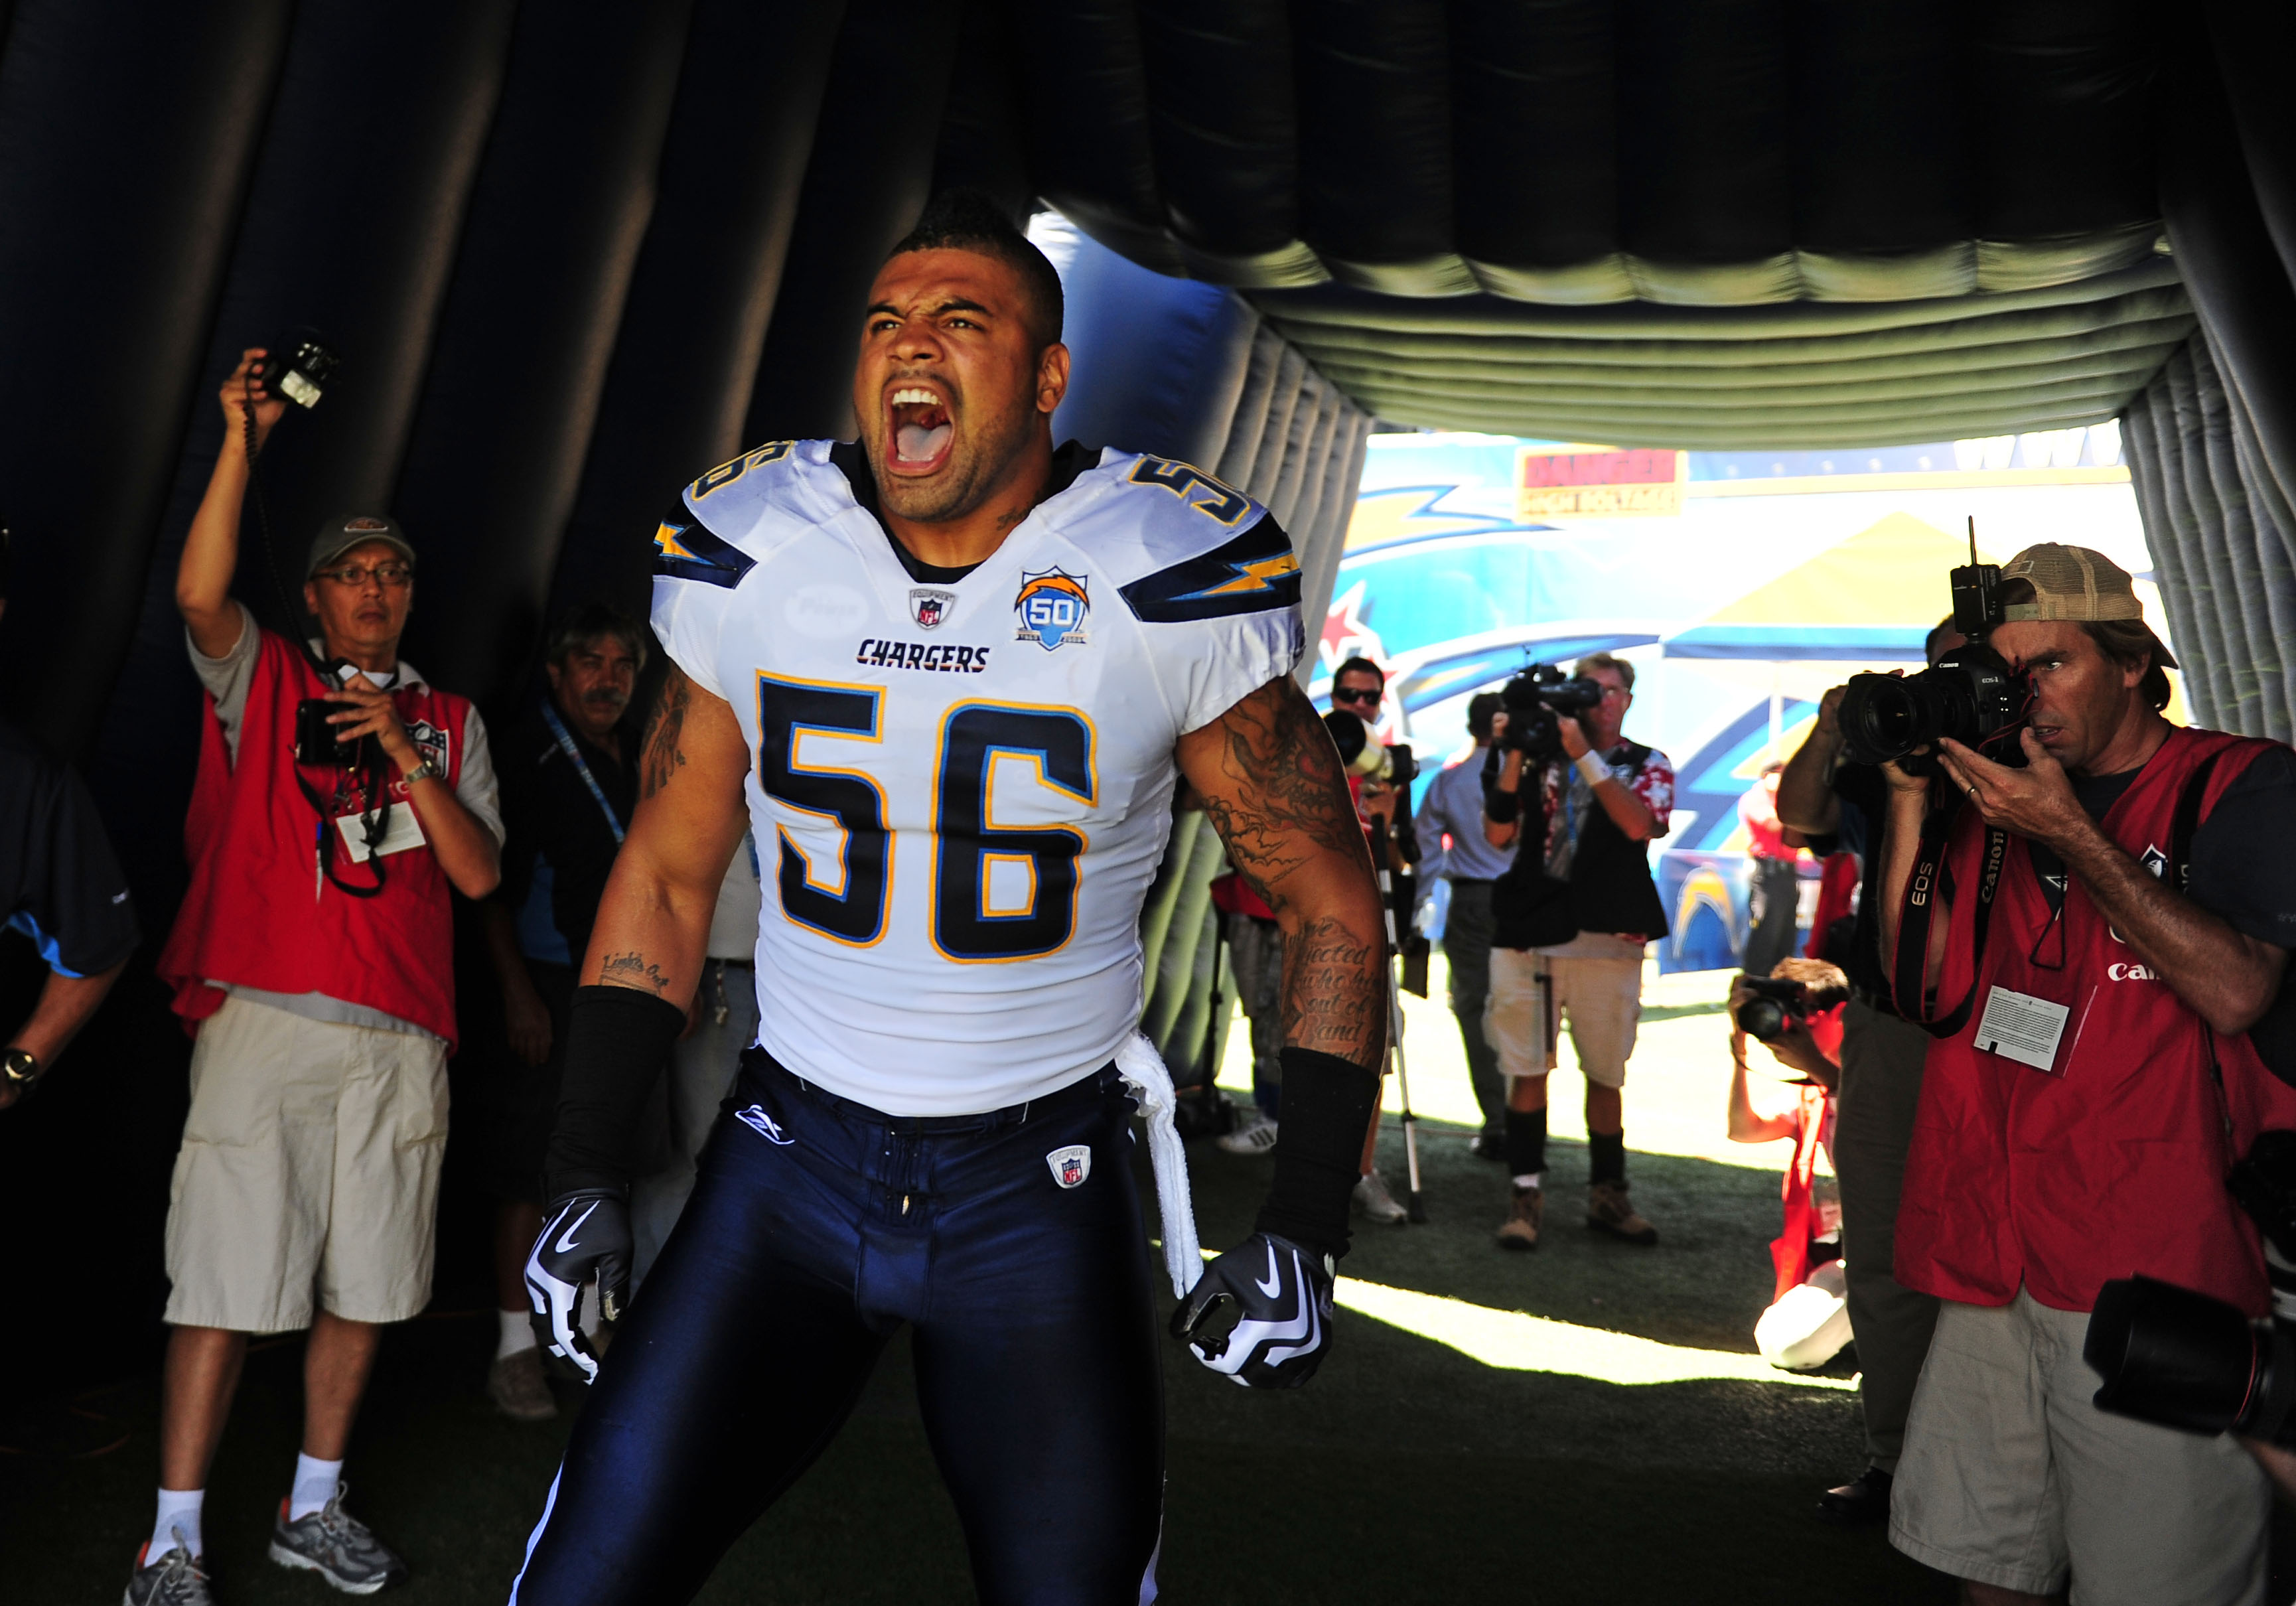 Shawne Merriman San Diego Chargers All-Pro linebacker